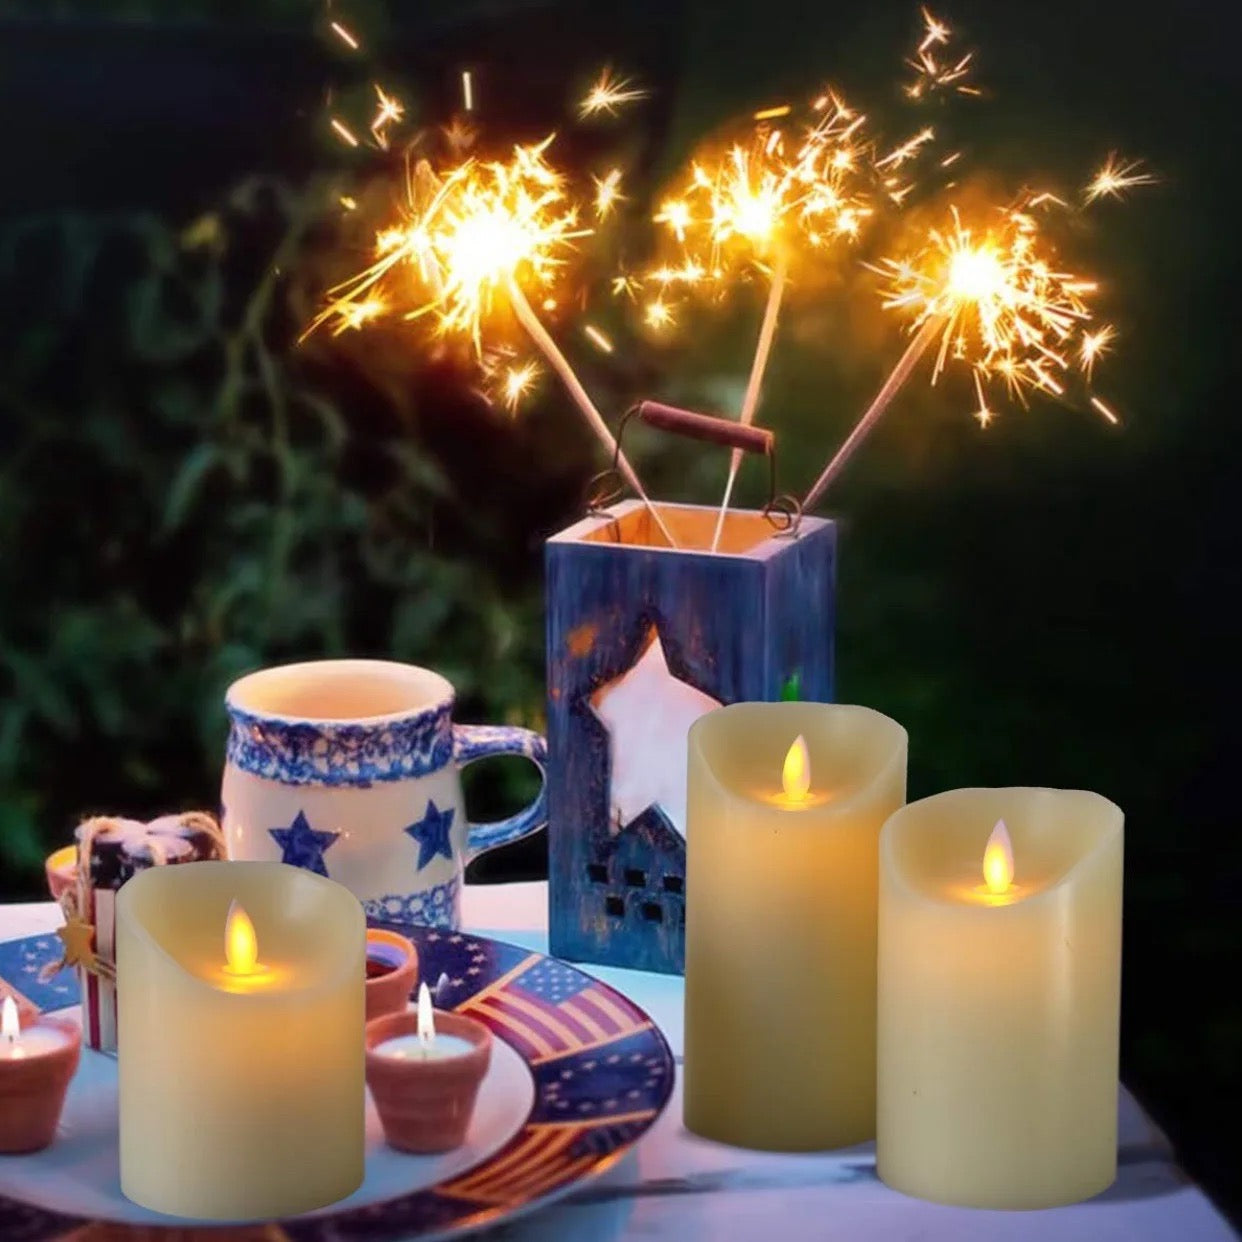 3 Flameless LED Candles in different sizes lit up and kept on a tea table along with utensils and sparklers